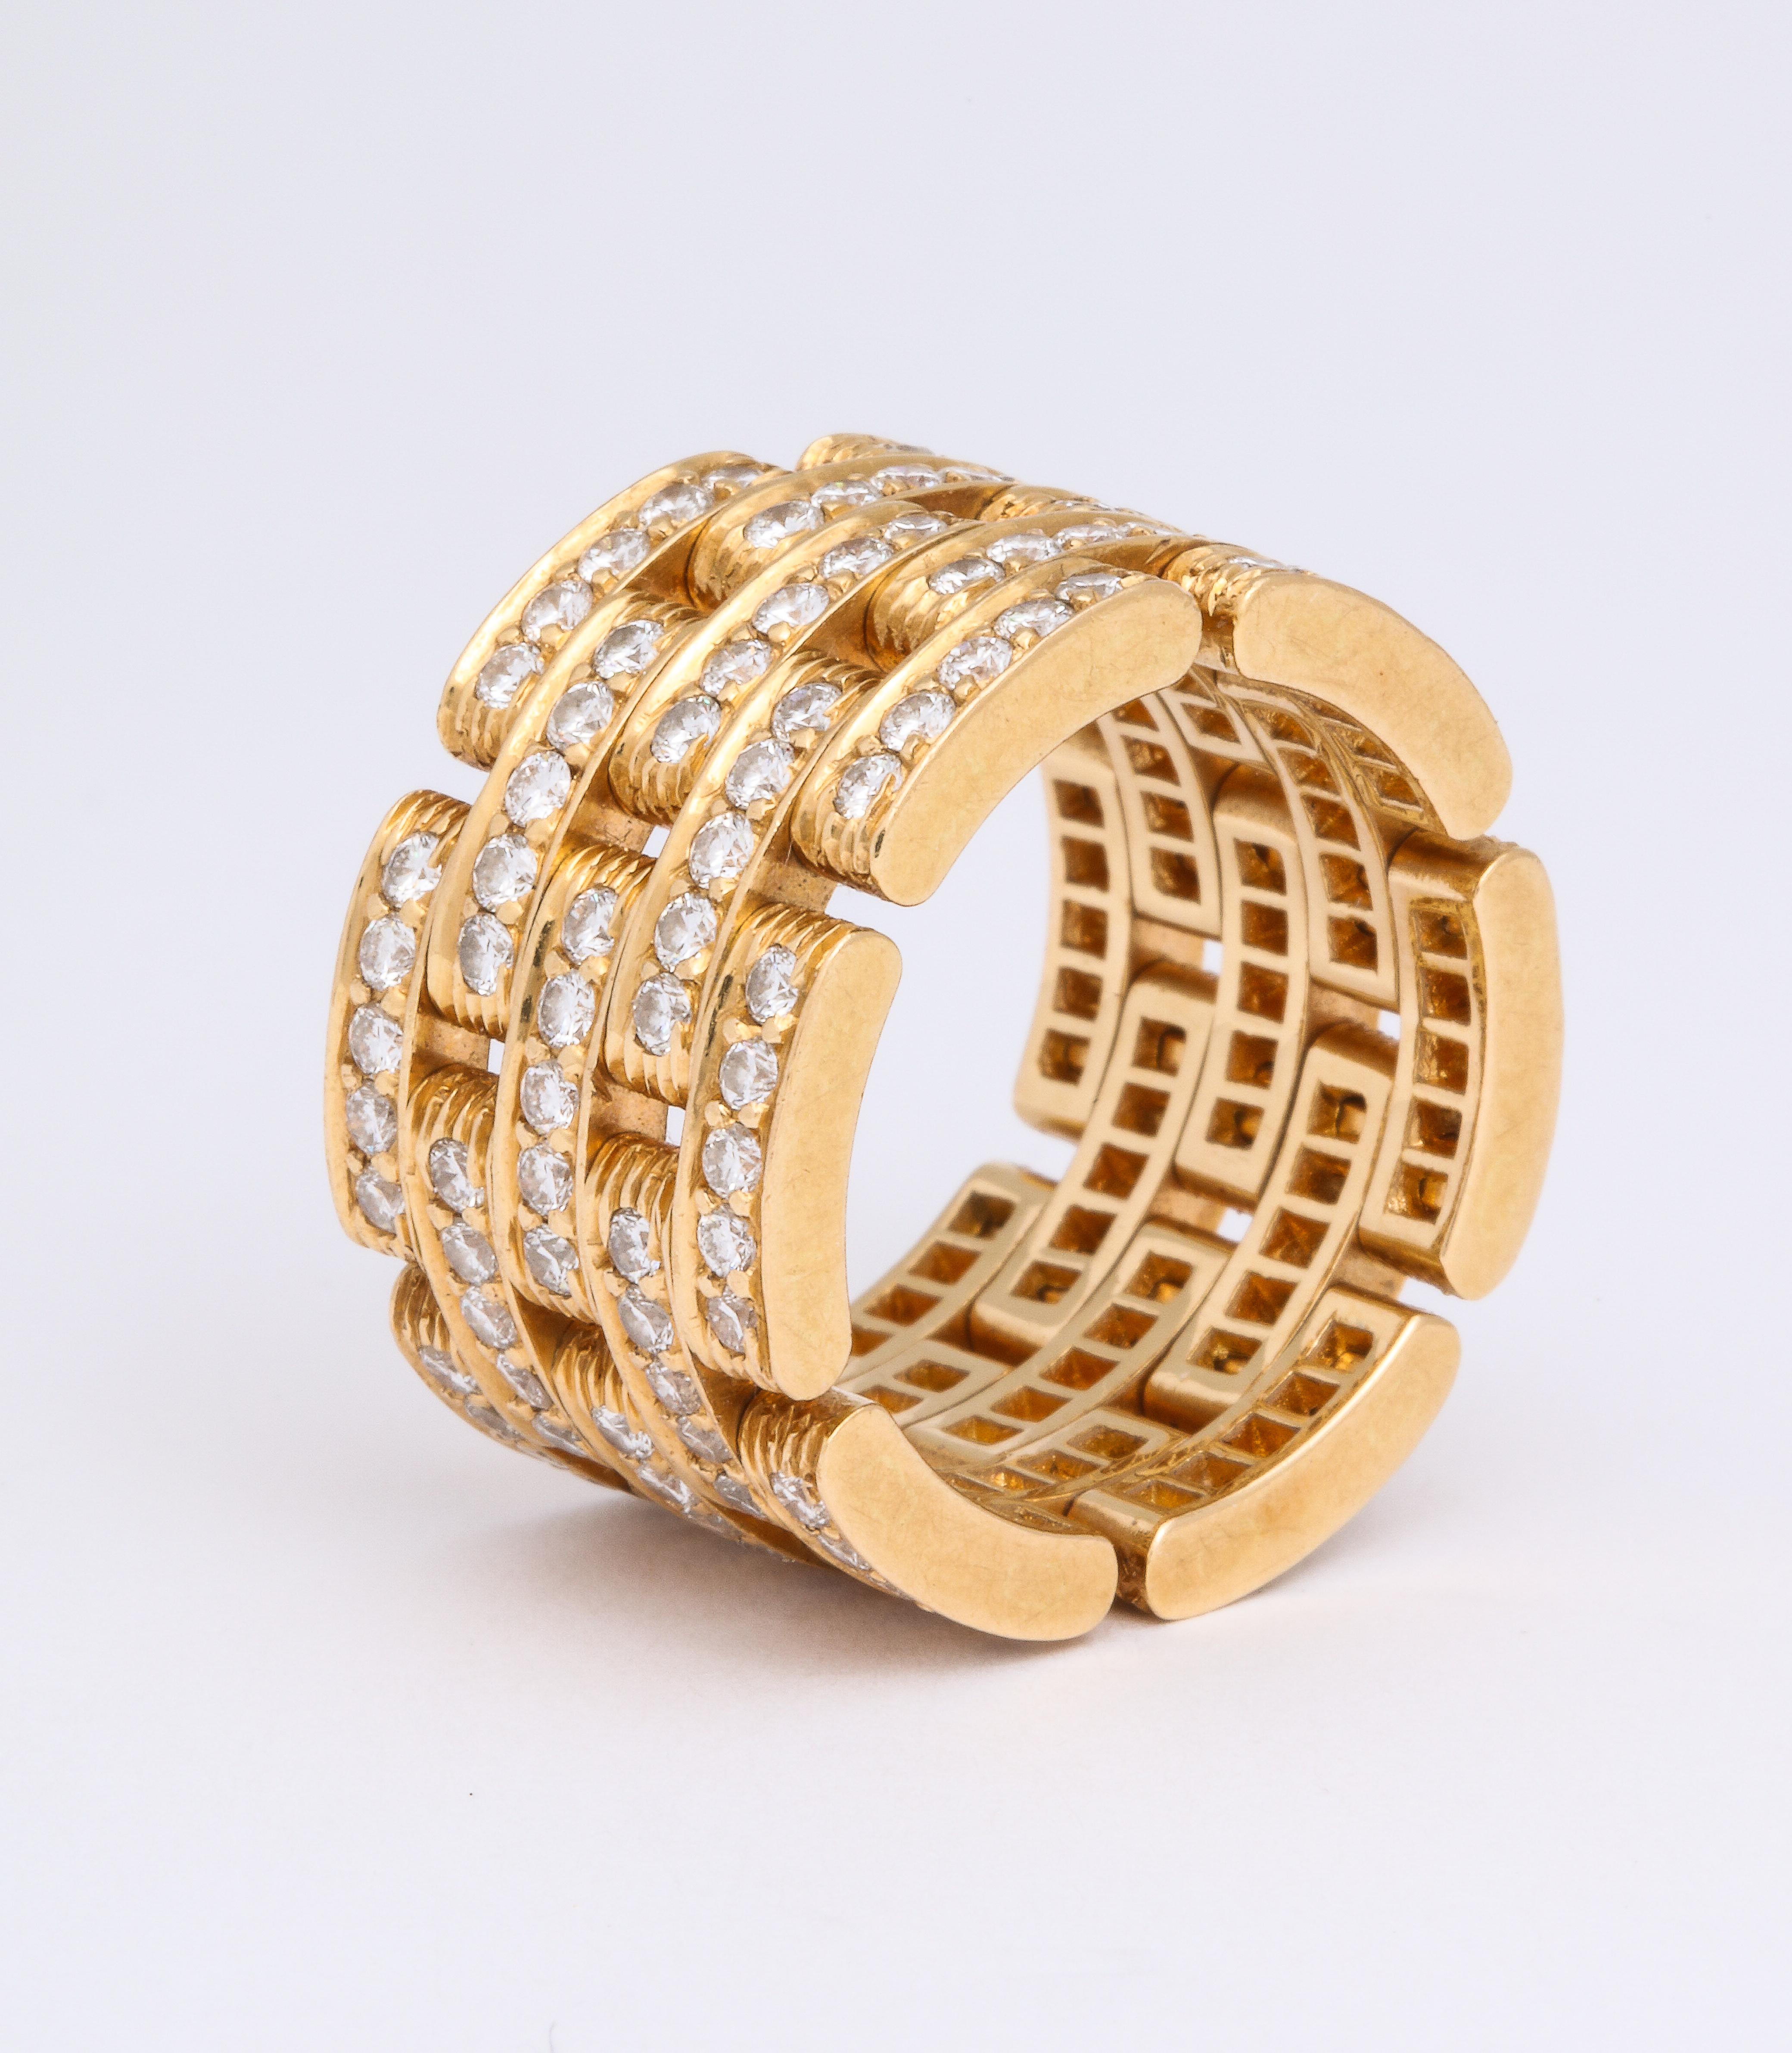 A must-have for the serious collector or the fashionista, this 18K yellow gold & diamond Cartier Pantherering is exquisitely set with approximately 4.50 carats total weight of round brilliant diamonds.  Letter of authenticity from Cartier.  US size